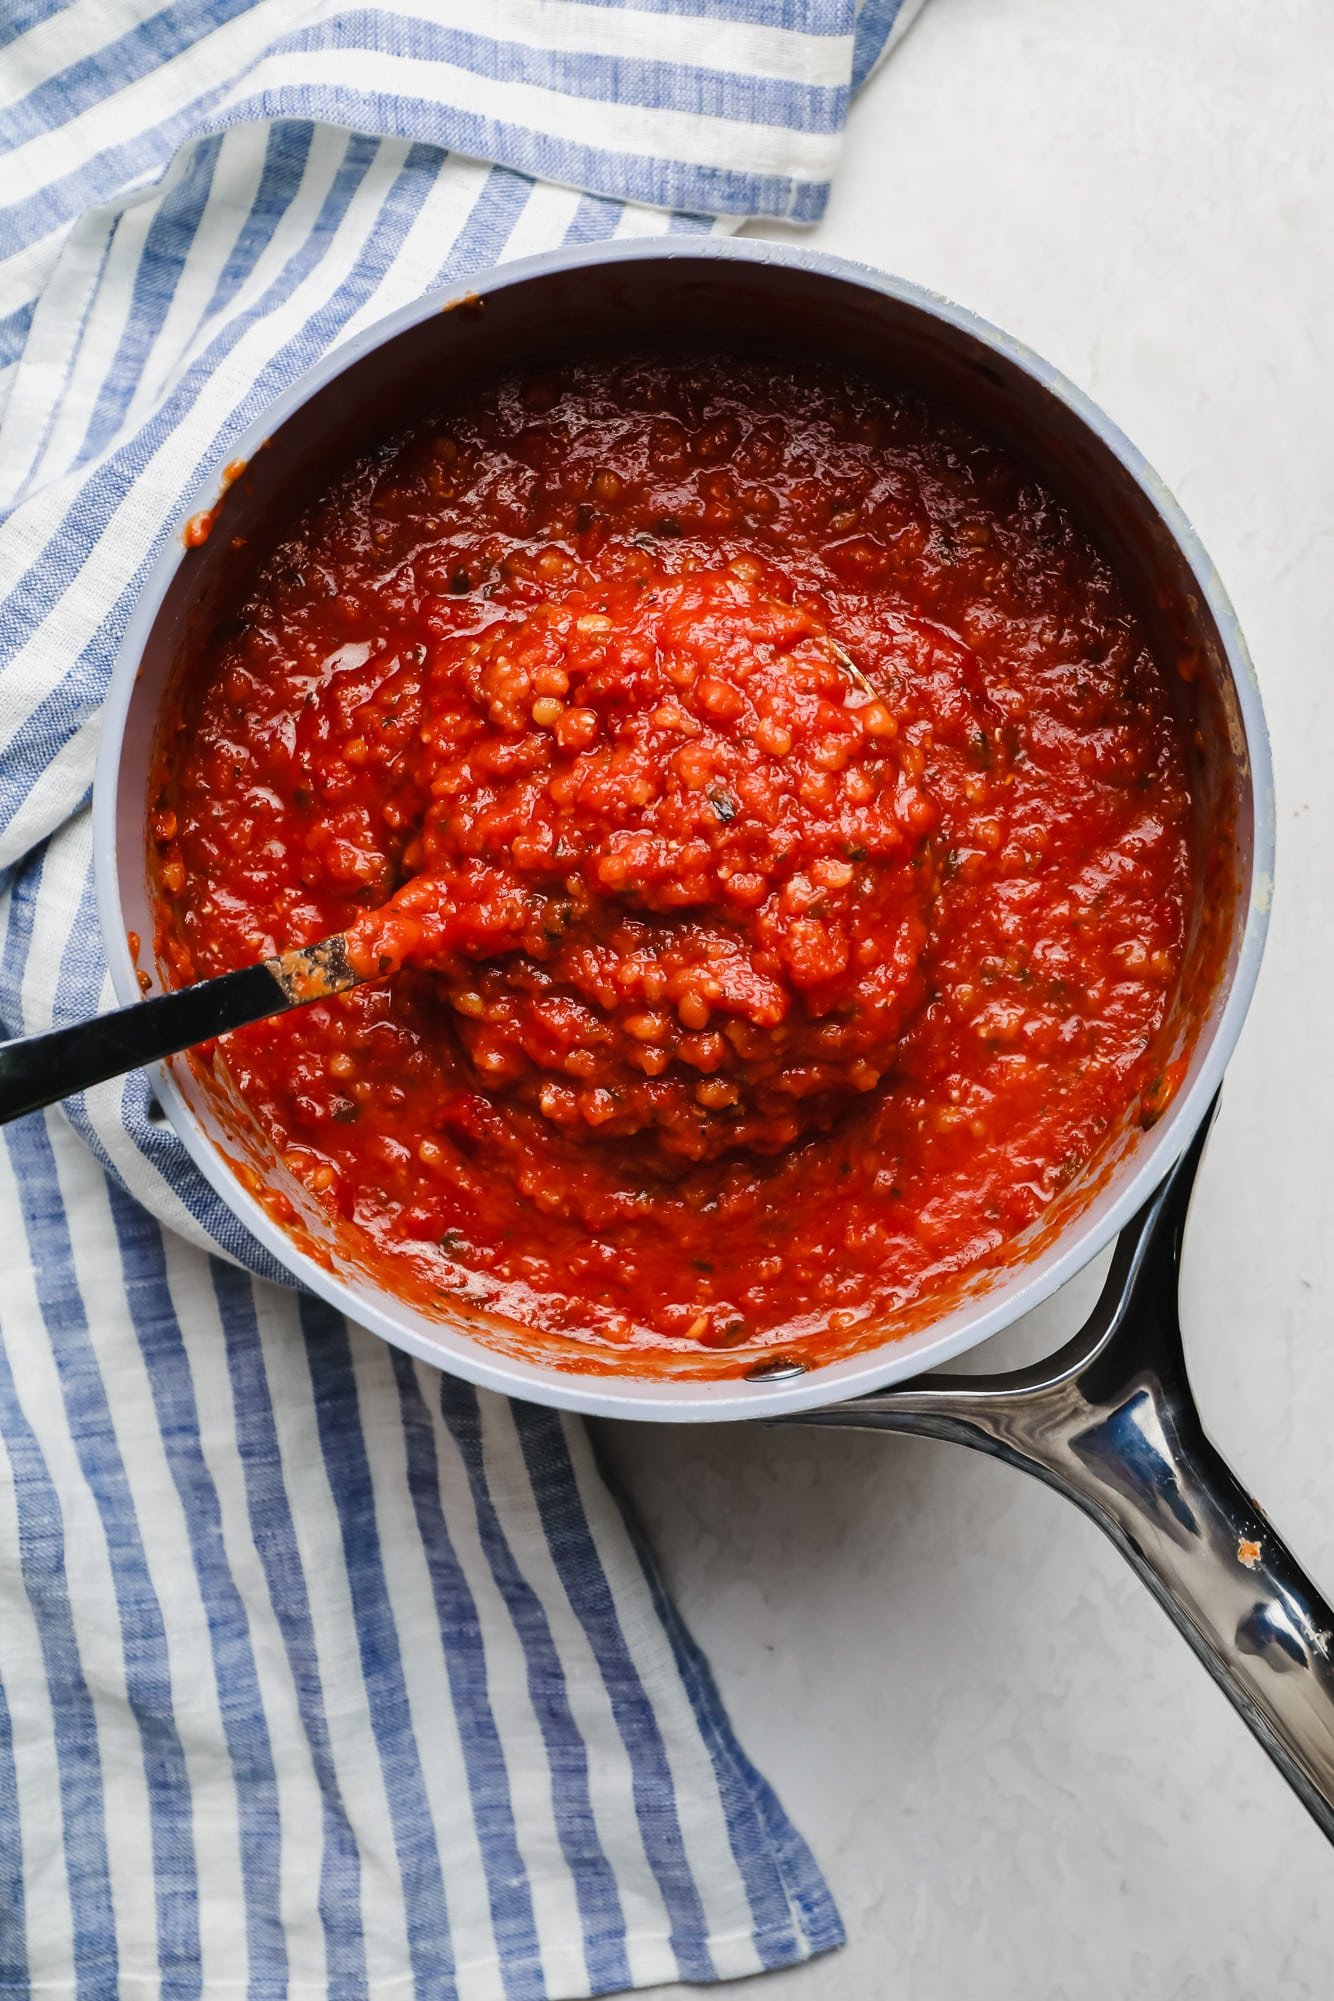 stirring cooked red lentils and marinara sauce in a white saucepan.